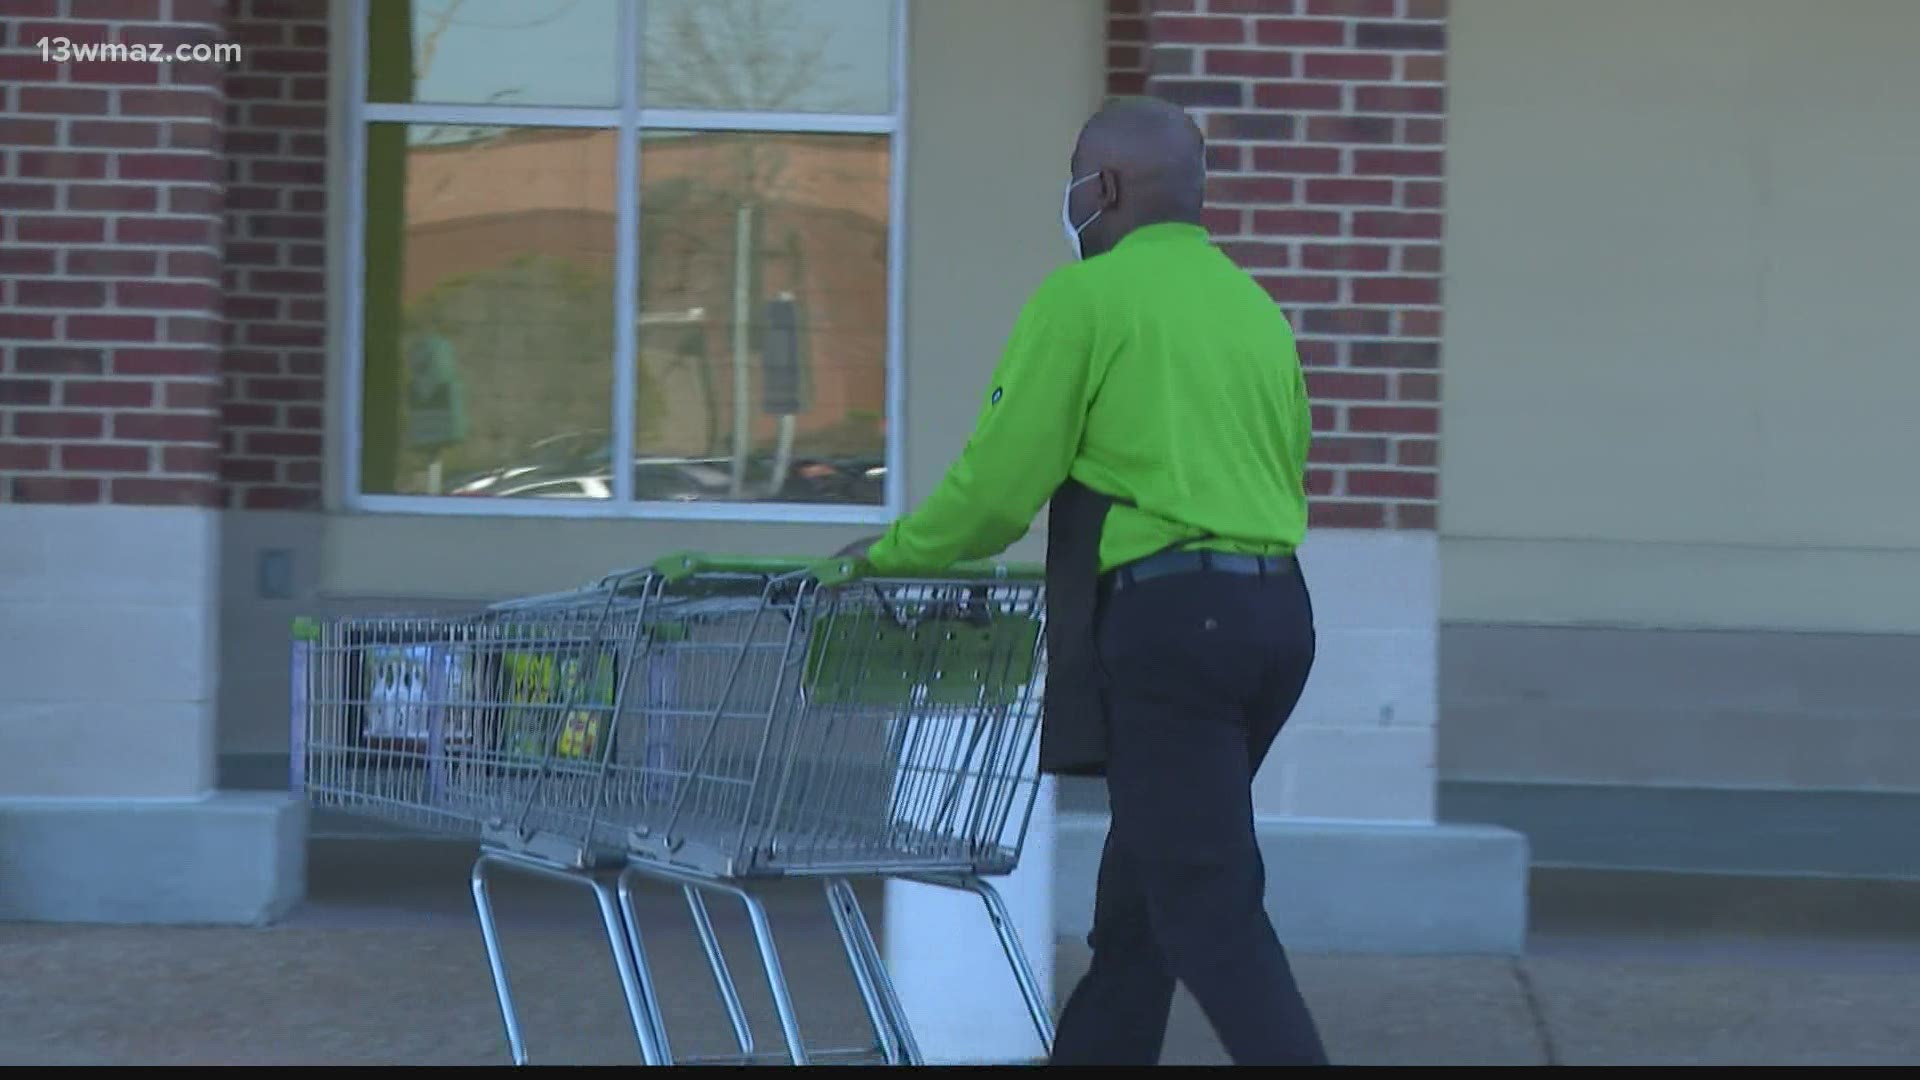 Some customers say Johnny Smith, who they call Mr. Publix, is the reason they want to go grocery shopping